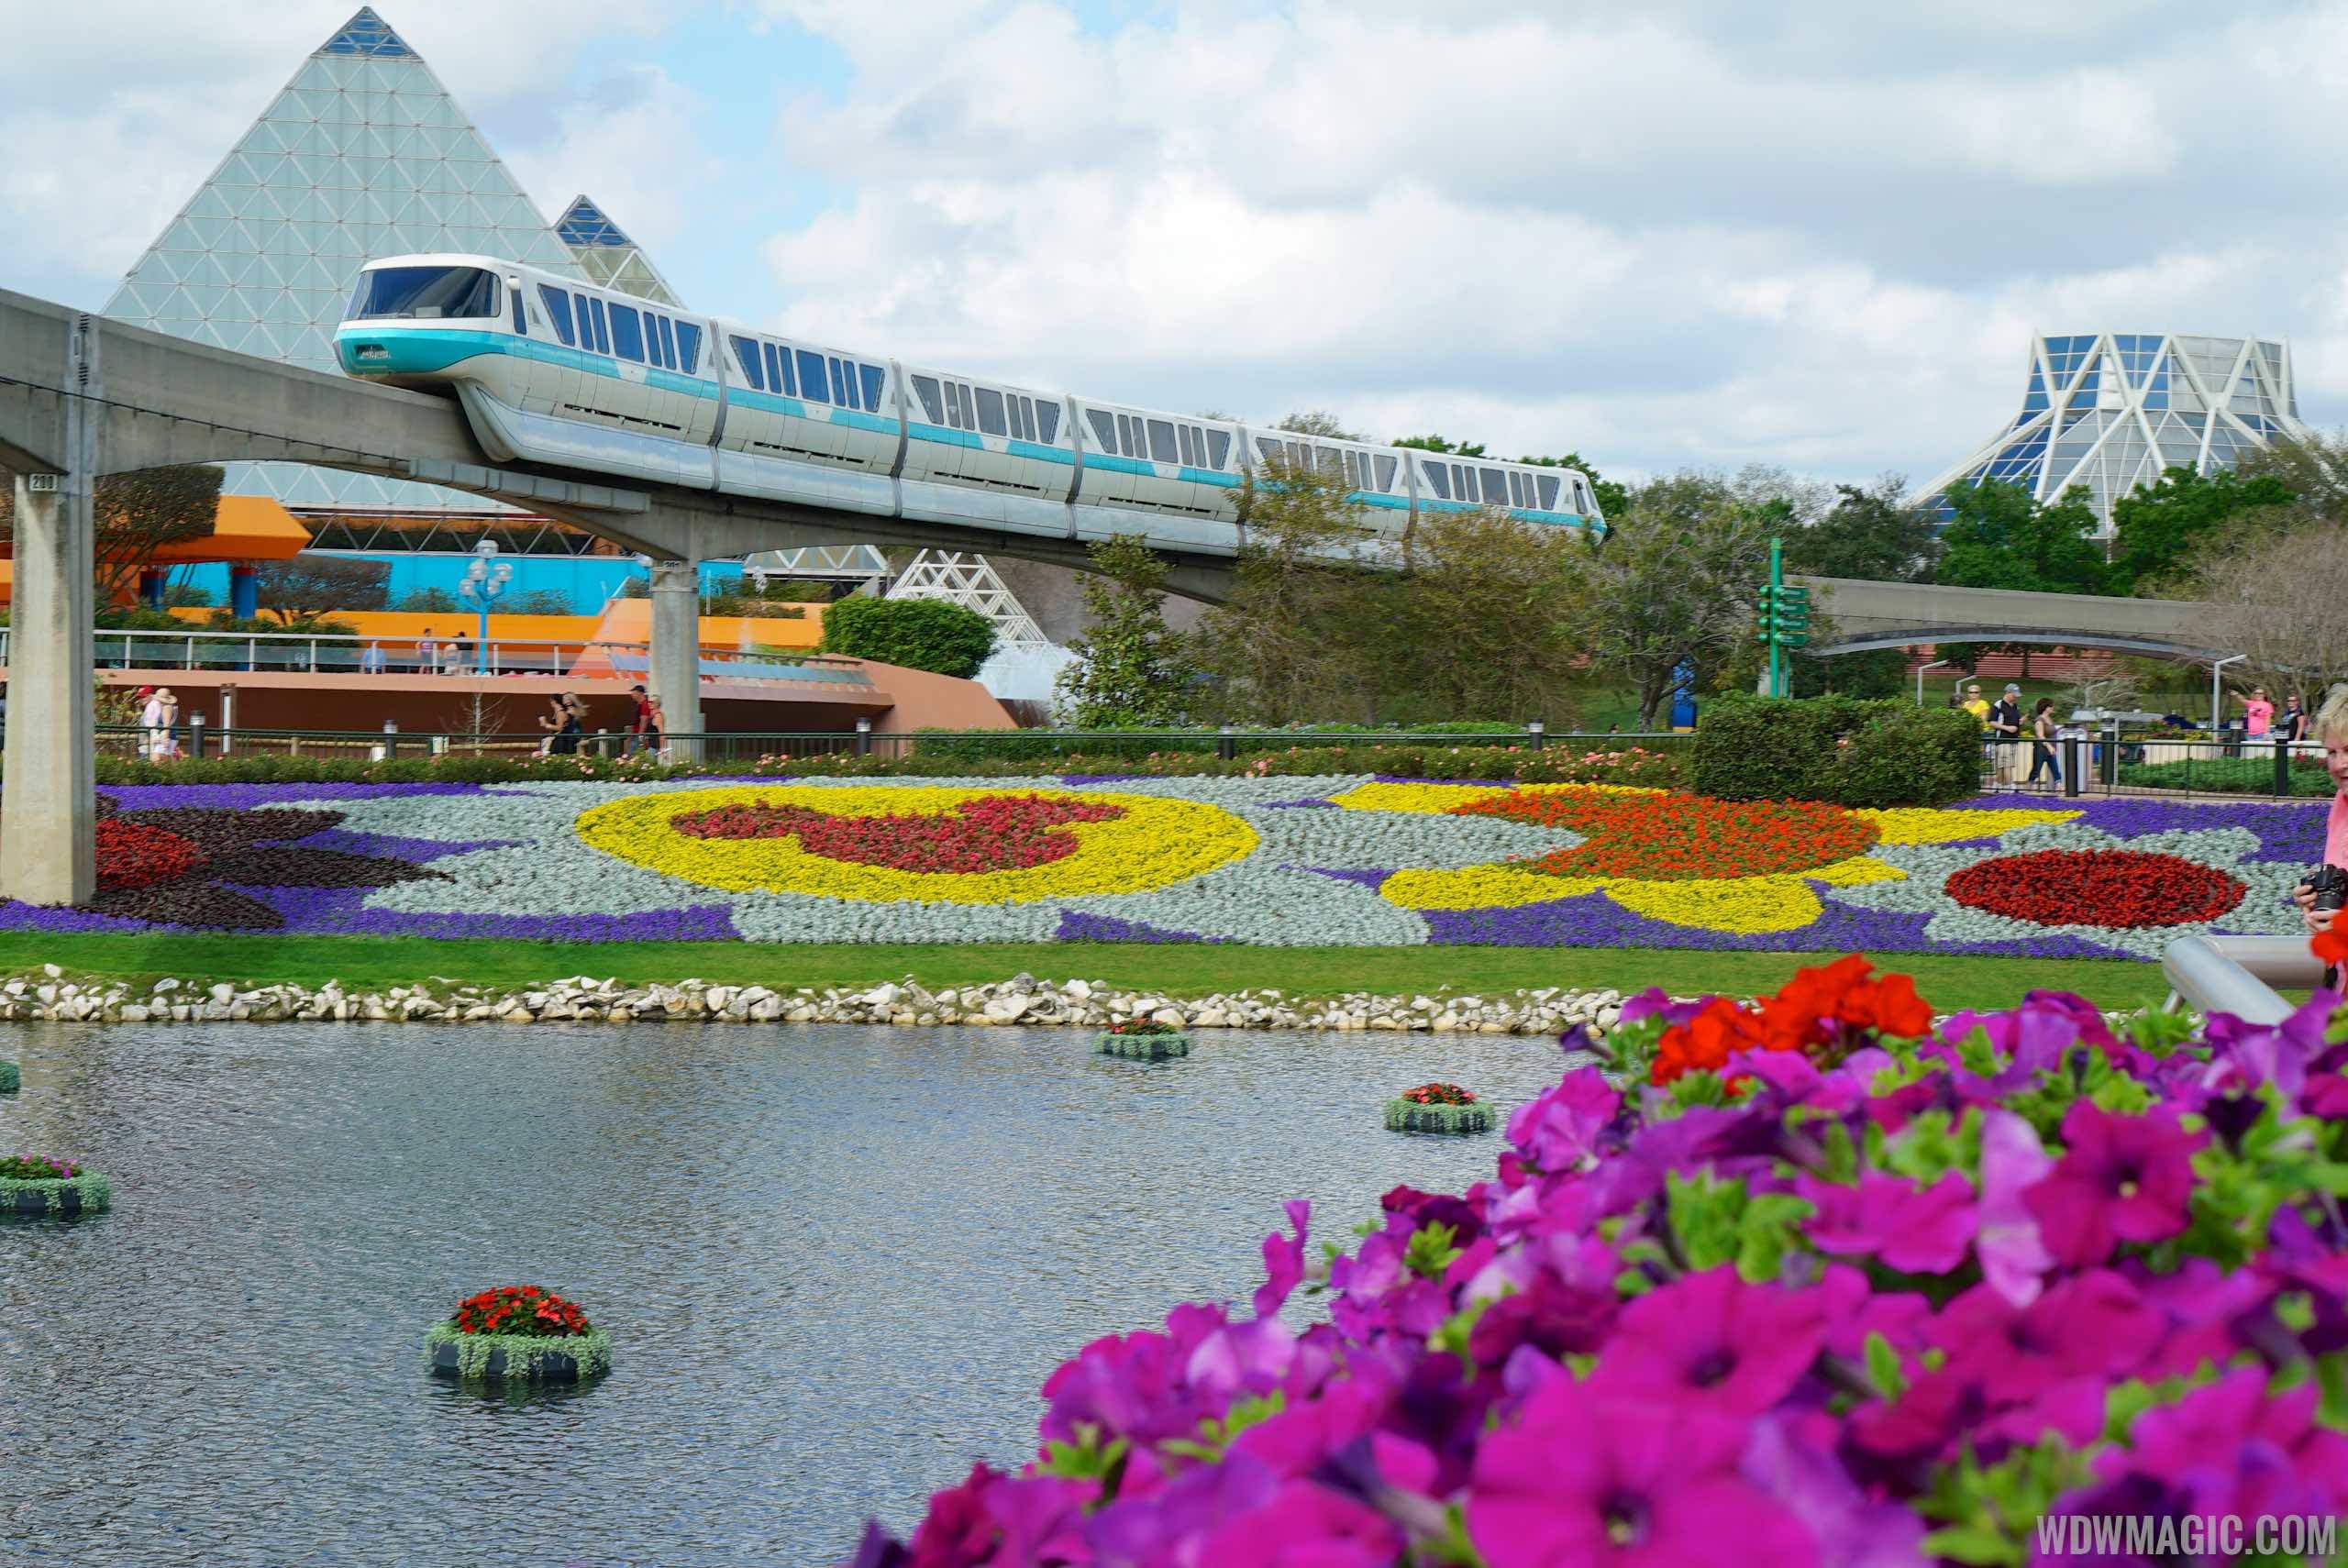 Monorail at the Flower and Garden Festival